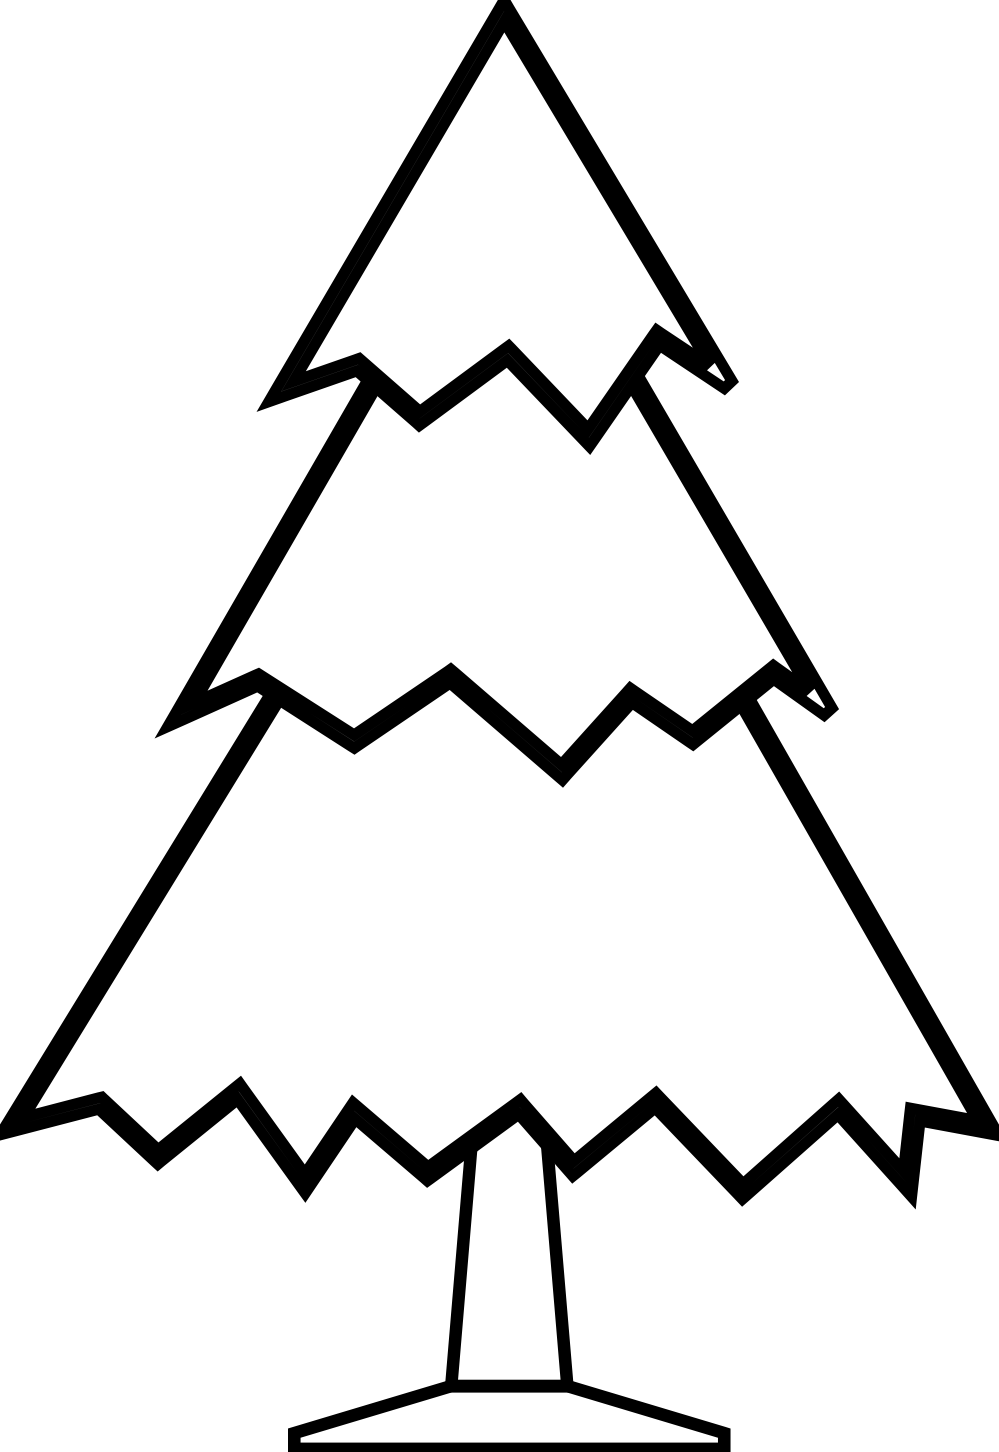 Christmas tree clipart to color - ClipartFox